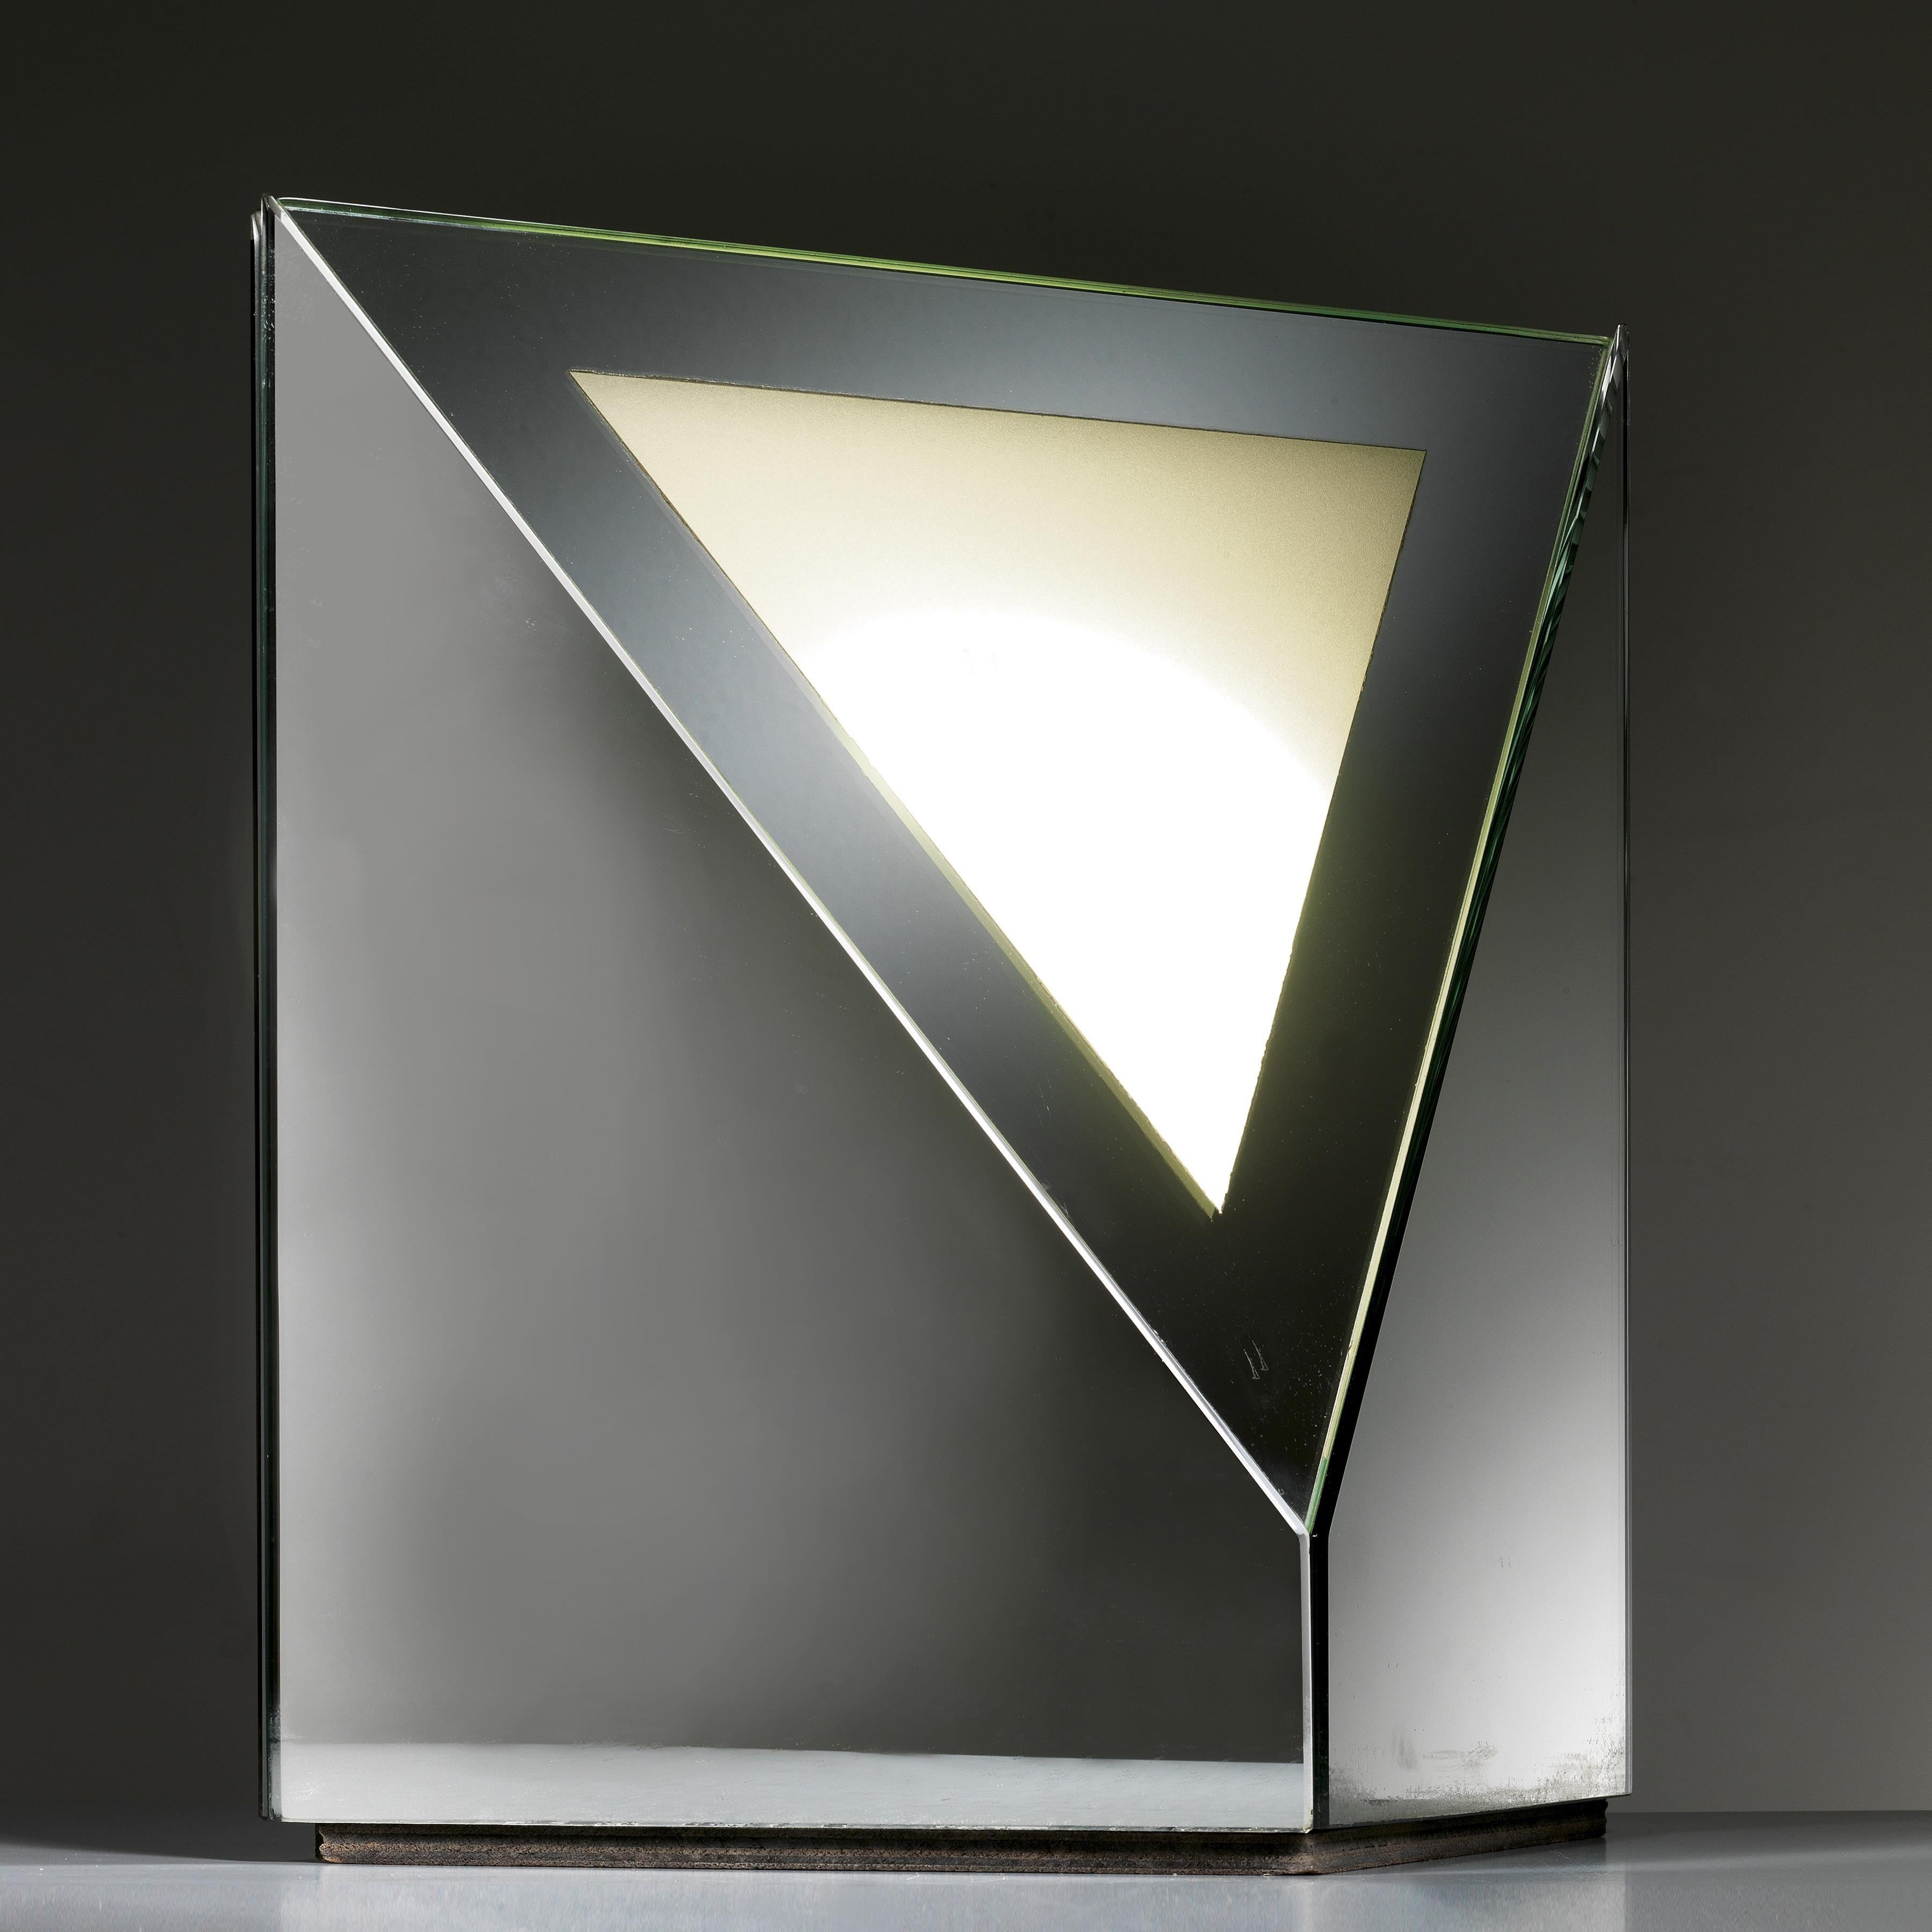 Nanda Vigo
(Milan, 1936 - 2020)
TRIGGER OF THE SPACE MODEL TABLE LAMP
in aluminum and mirrored glass
Italian production, 1981
cm H48xL48xD22
The work is accompanied by authentication from the Nanda Vigo Archive
 
ALUMINUM AND MIRRORED GLASS TABLE